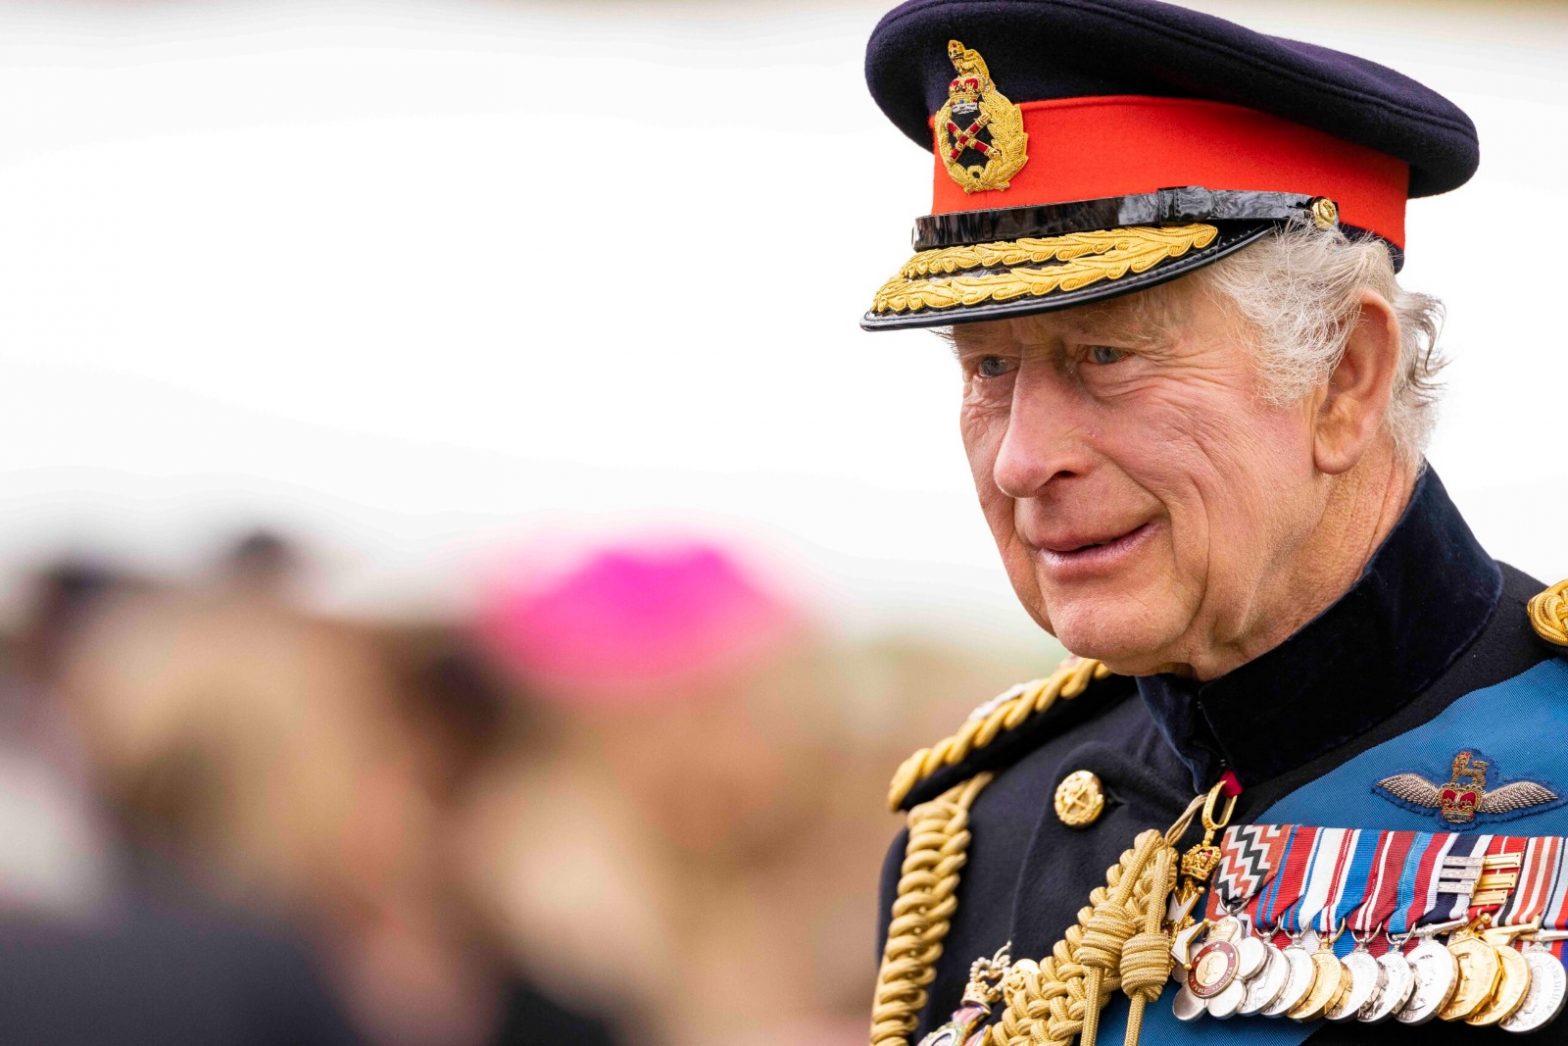 King Charles III salutes as he rides to his first Birthday Parade as sovereign | Watch video